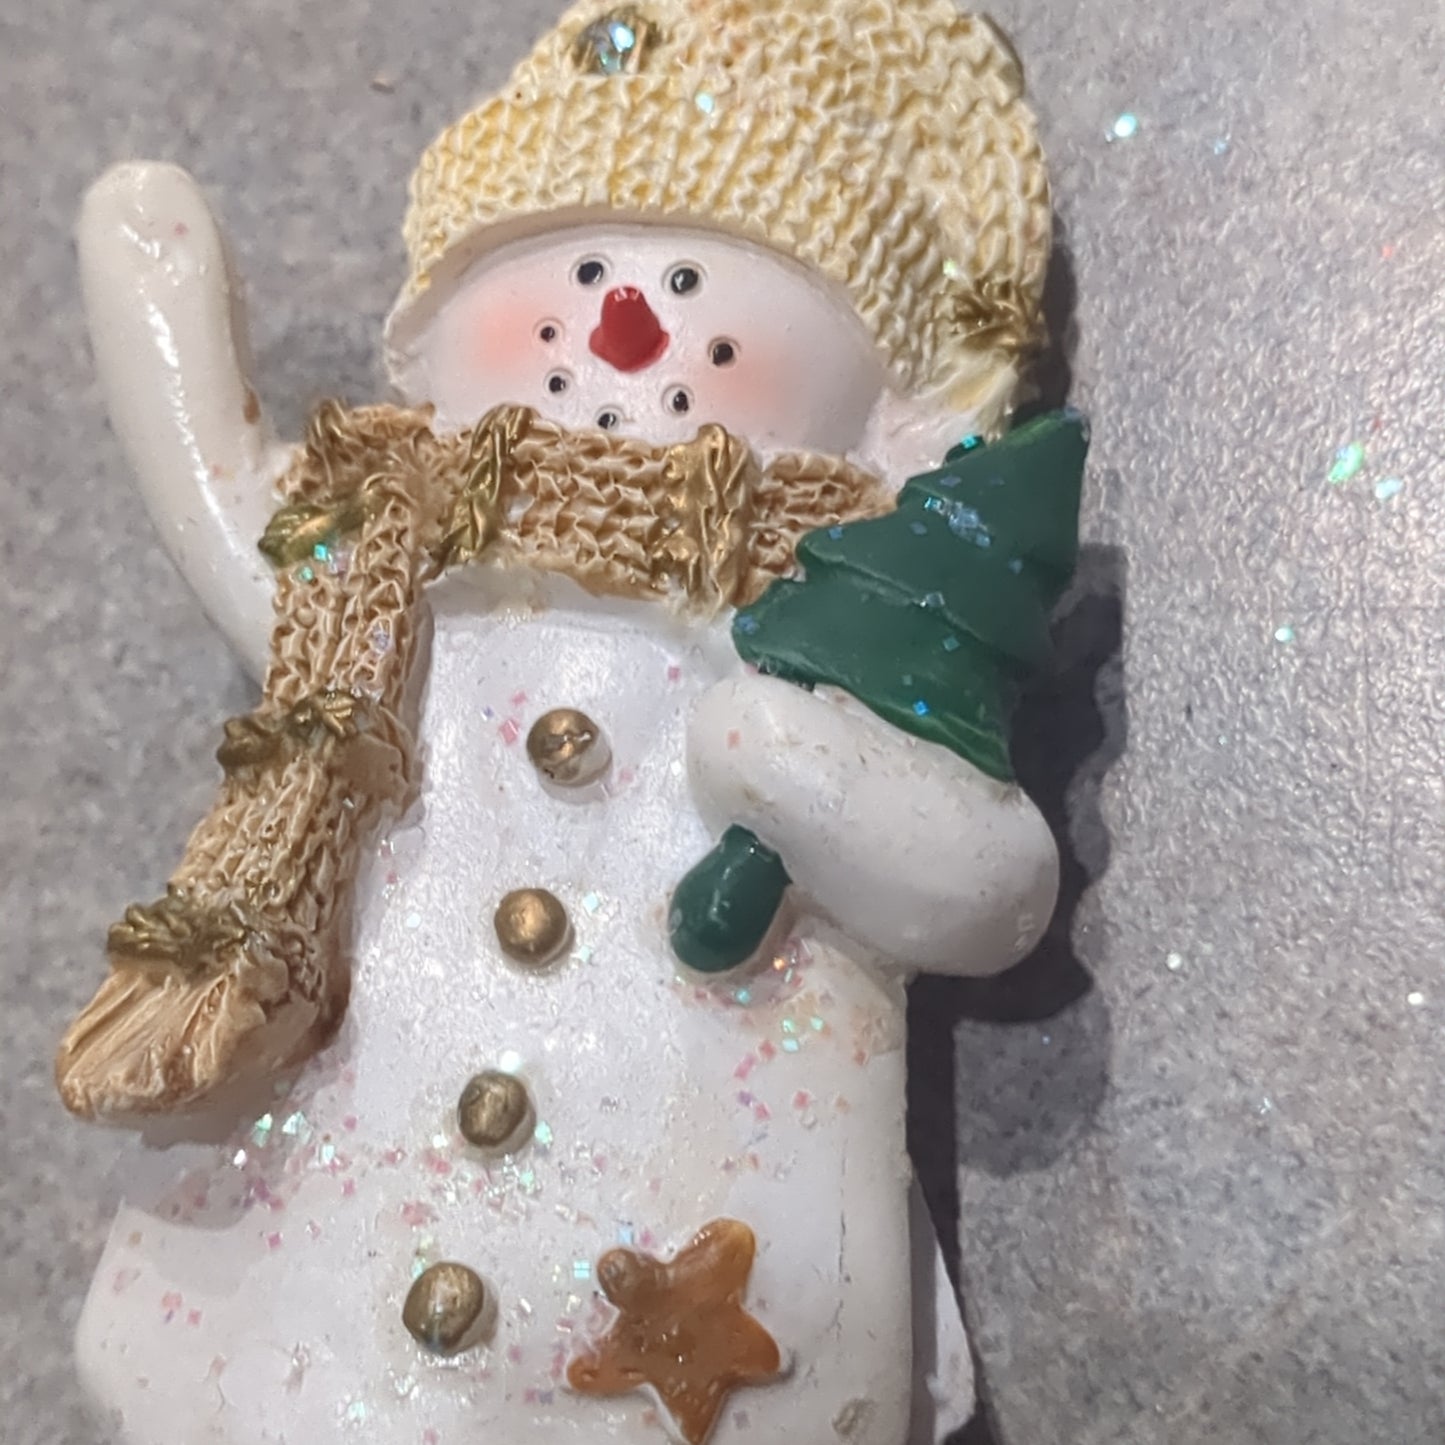 Polycrylic snowman ornament with tree yellow